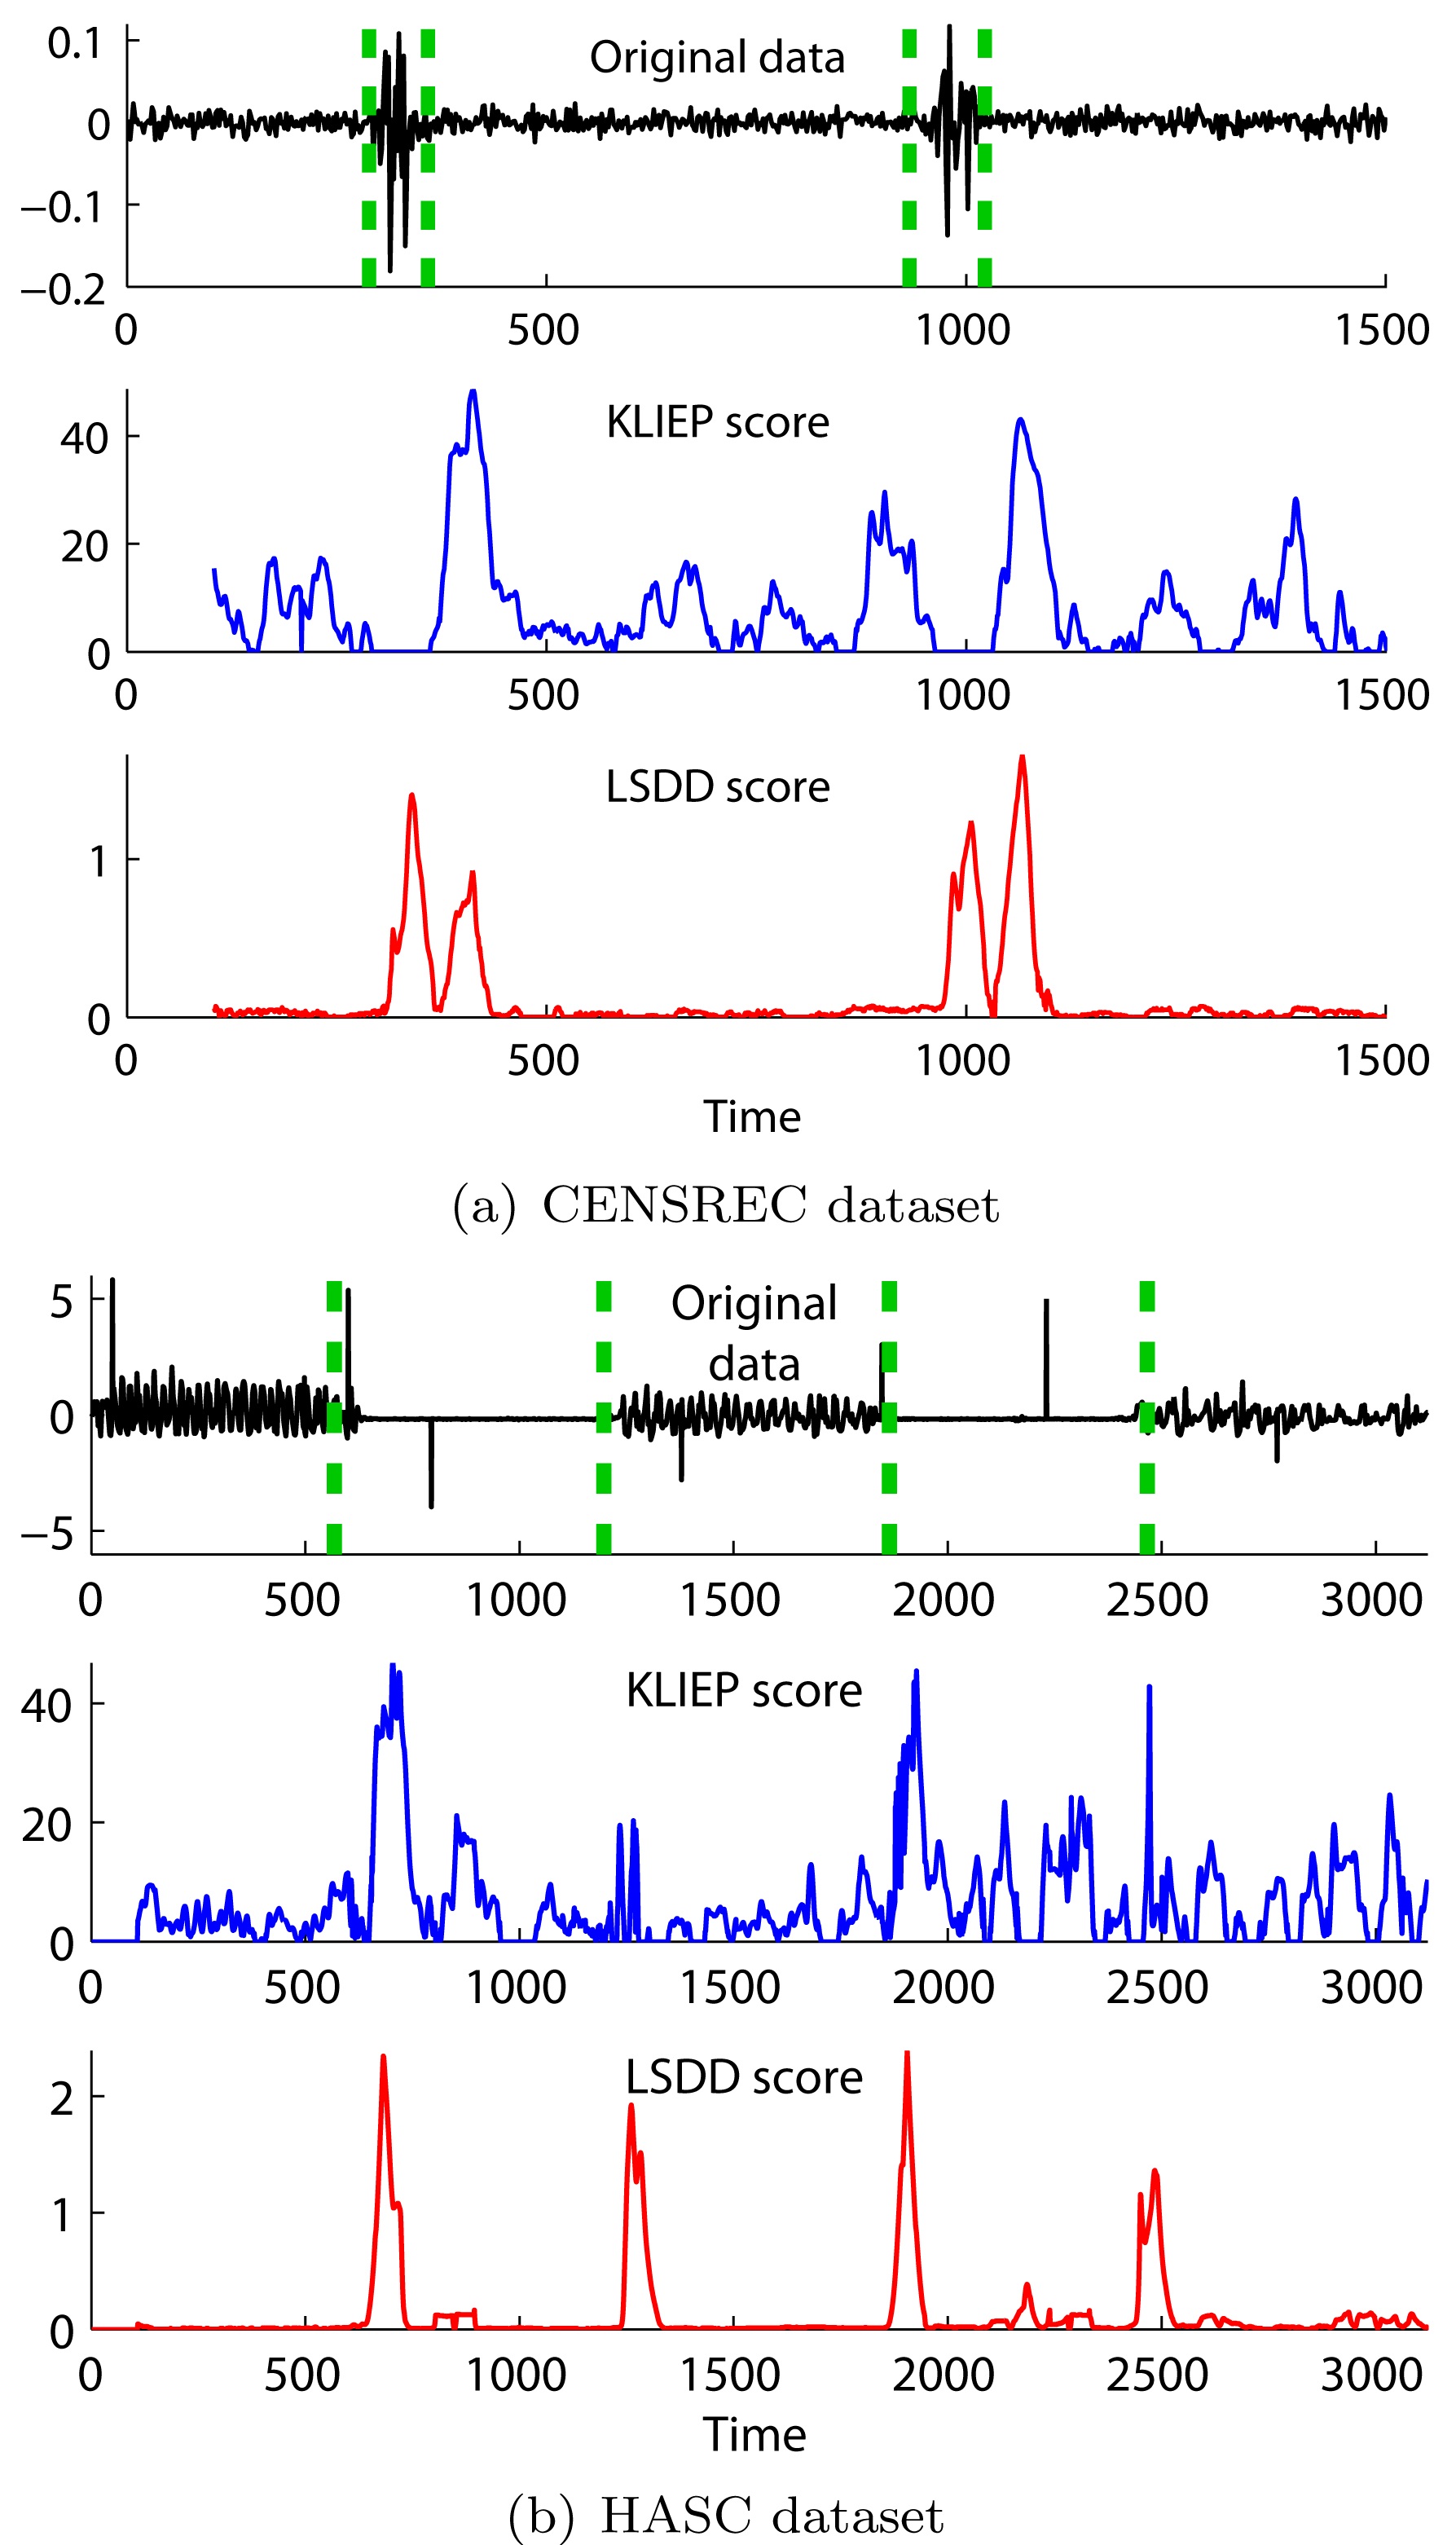 Results of change-point detection. Original time-series data is plotted in the top graphs, and change scores obtained by KLIEP (Kullback-Leibler importance estimation procedure; Section III-A) and LSDD (least-squares density difference; Section III-D) are plotted in the bottom graphs. (a) CENSREC (Corpora and Environments for Noisy Speech Recognition) dataset, (b) HASC (Human Activity Sensing Consortium) dataset.